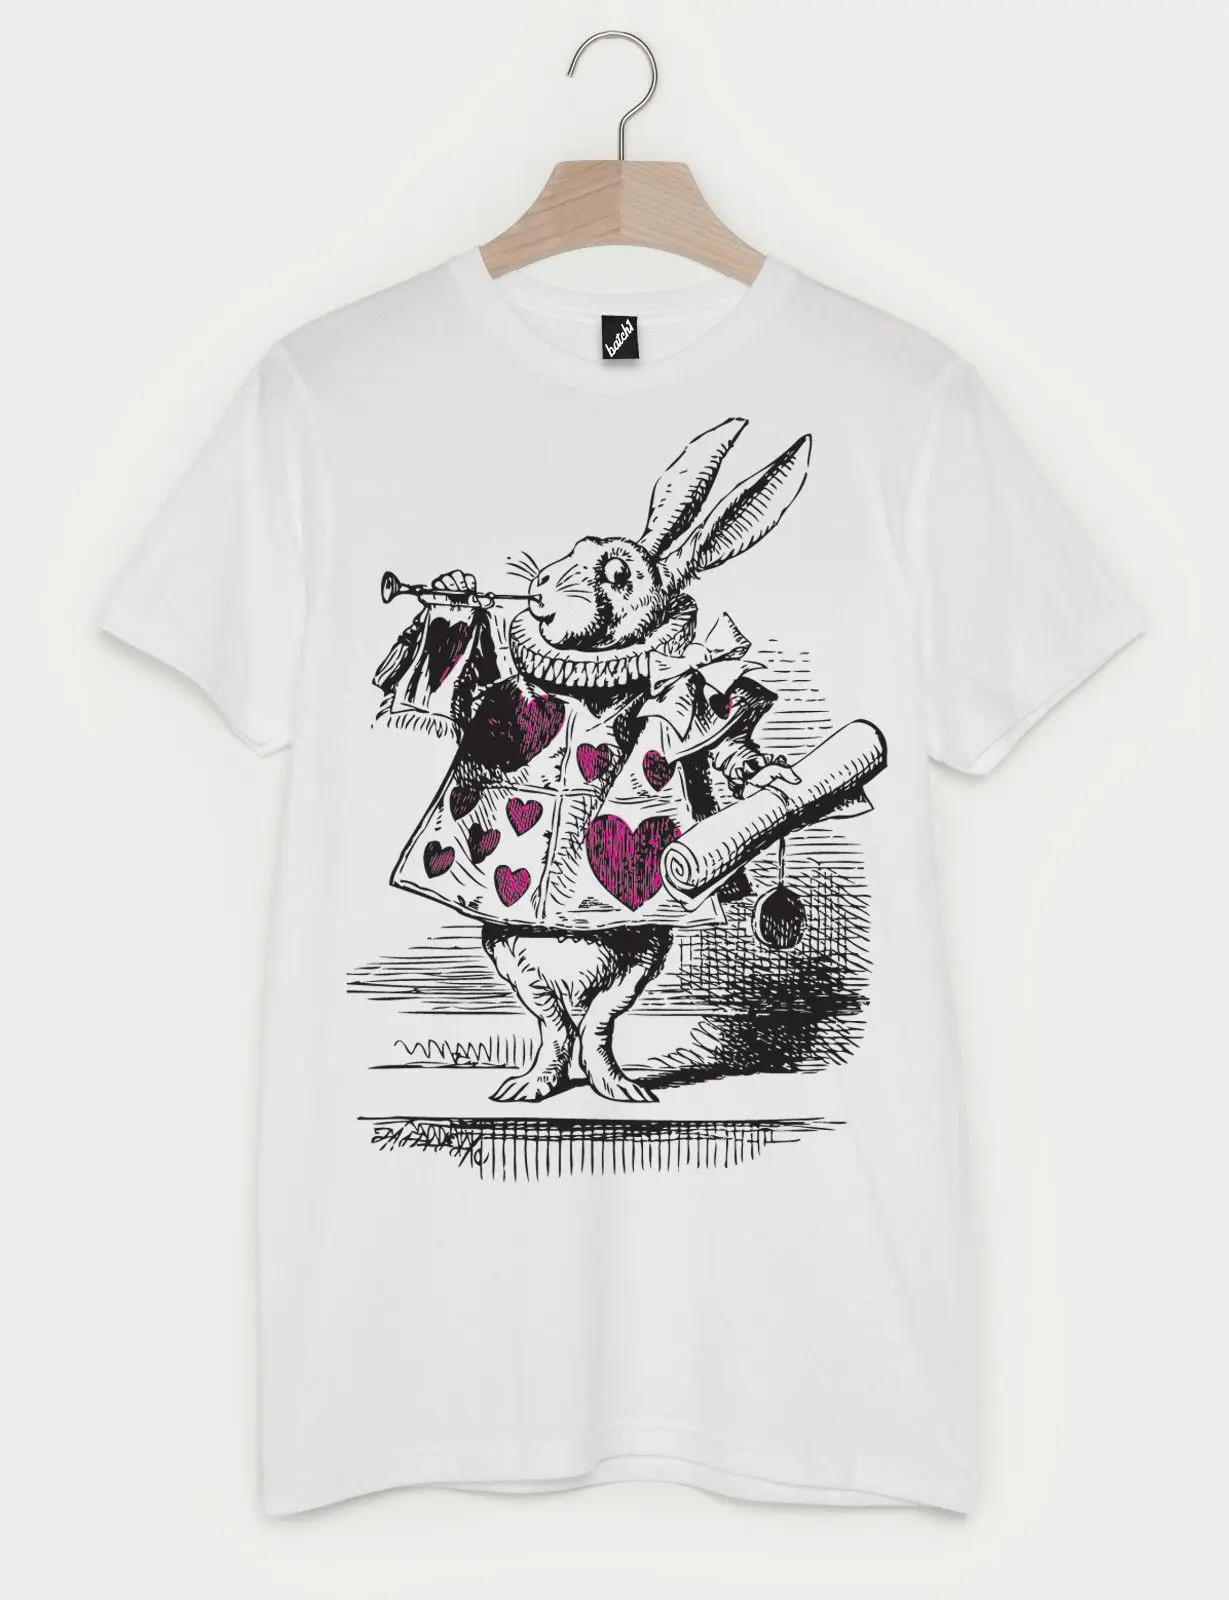 

BATCH1 ALICE IN WONDERLAND 150TH ANNIVERSARY RABBIT WITH TRUMPET UNISEX T-SHIRT New T Shirts Funny Tops Tee New Unisex Funny